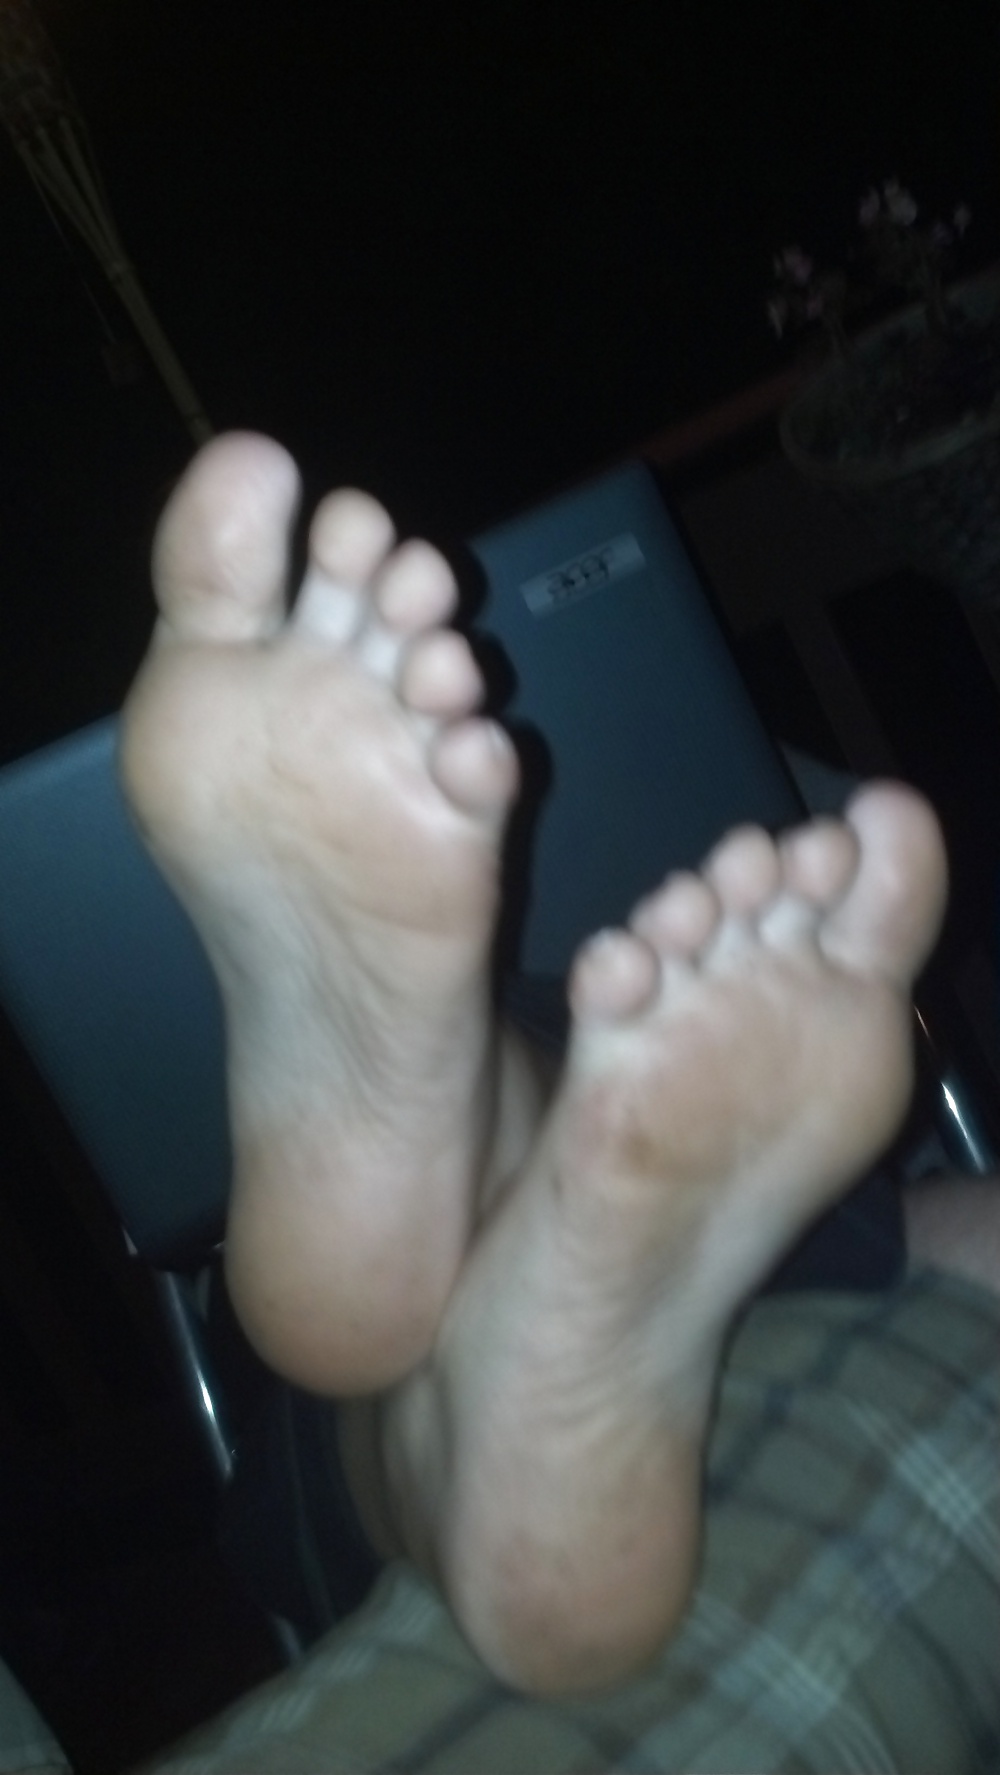 cum in me feet (hot wife) porn pictures